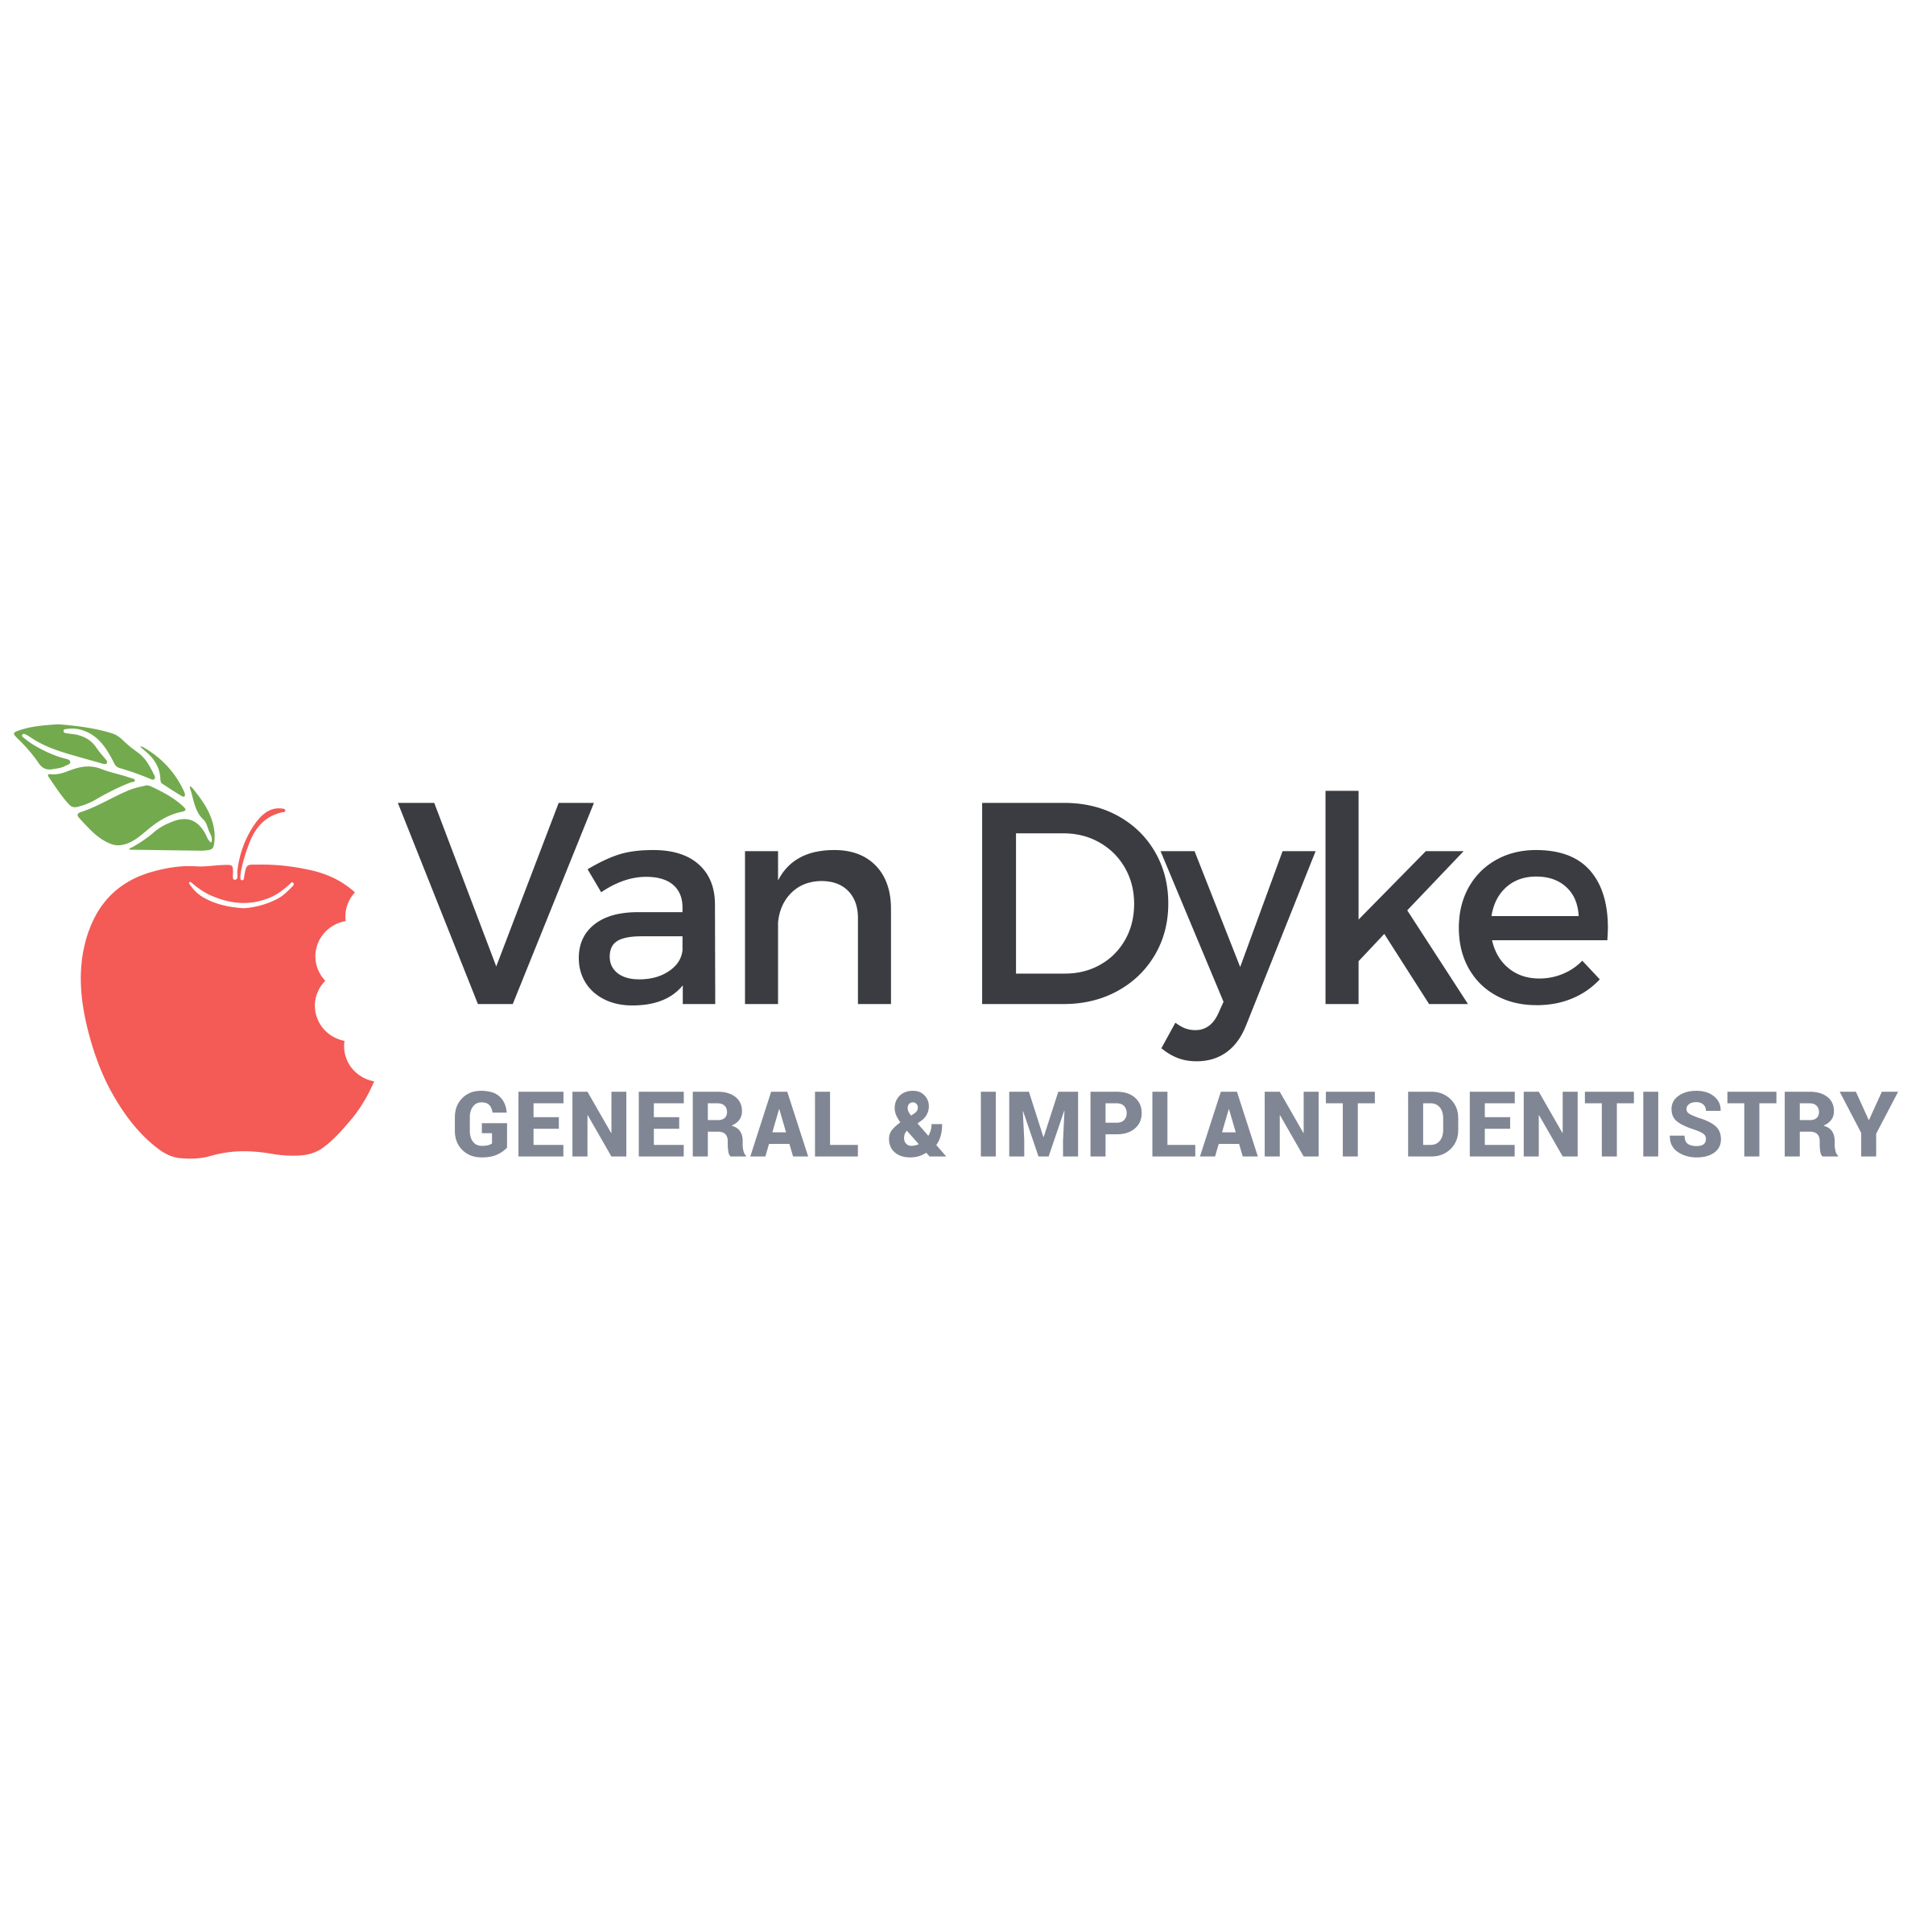 Van Dyke General and Implant Dentistry - Gainesville, FL 32607 - (352)377-1781 | ShowMeLocal.com